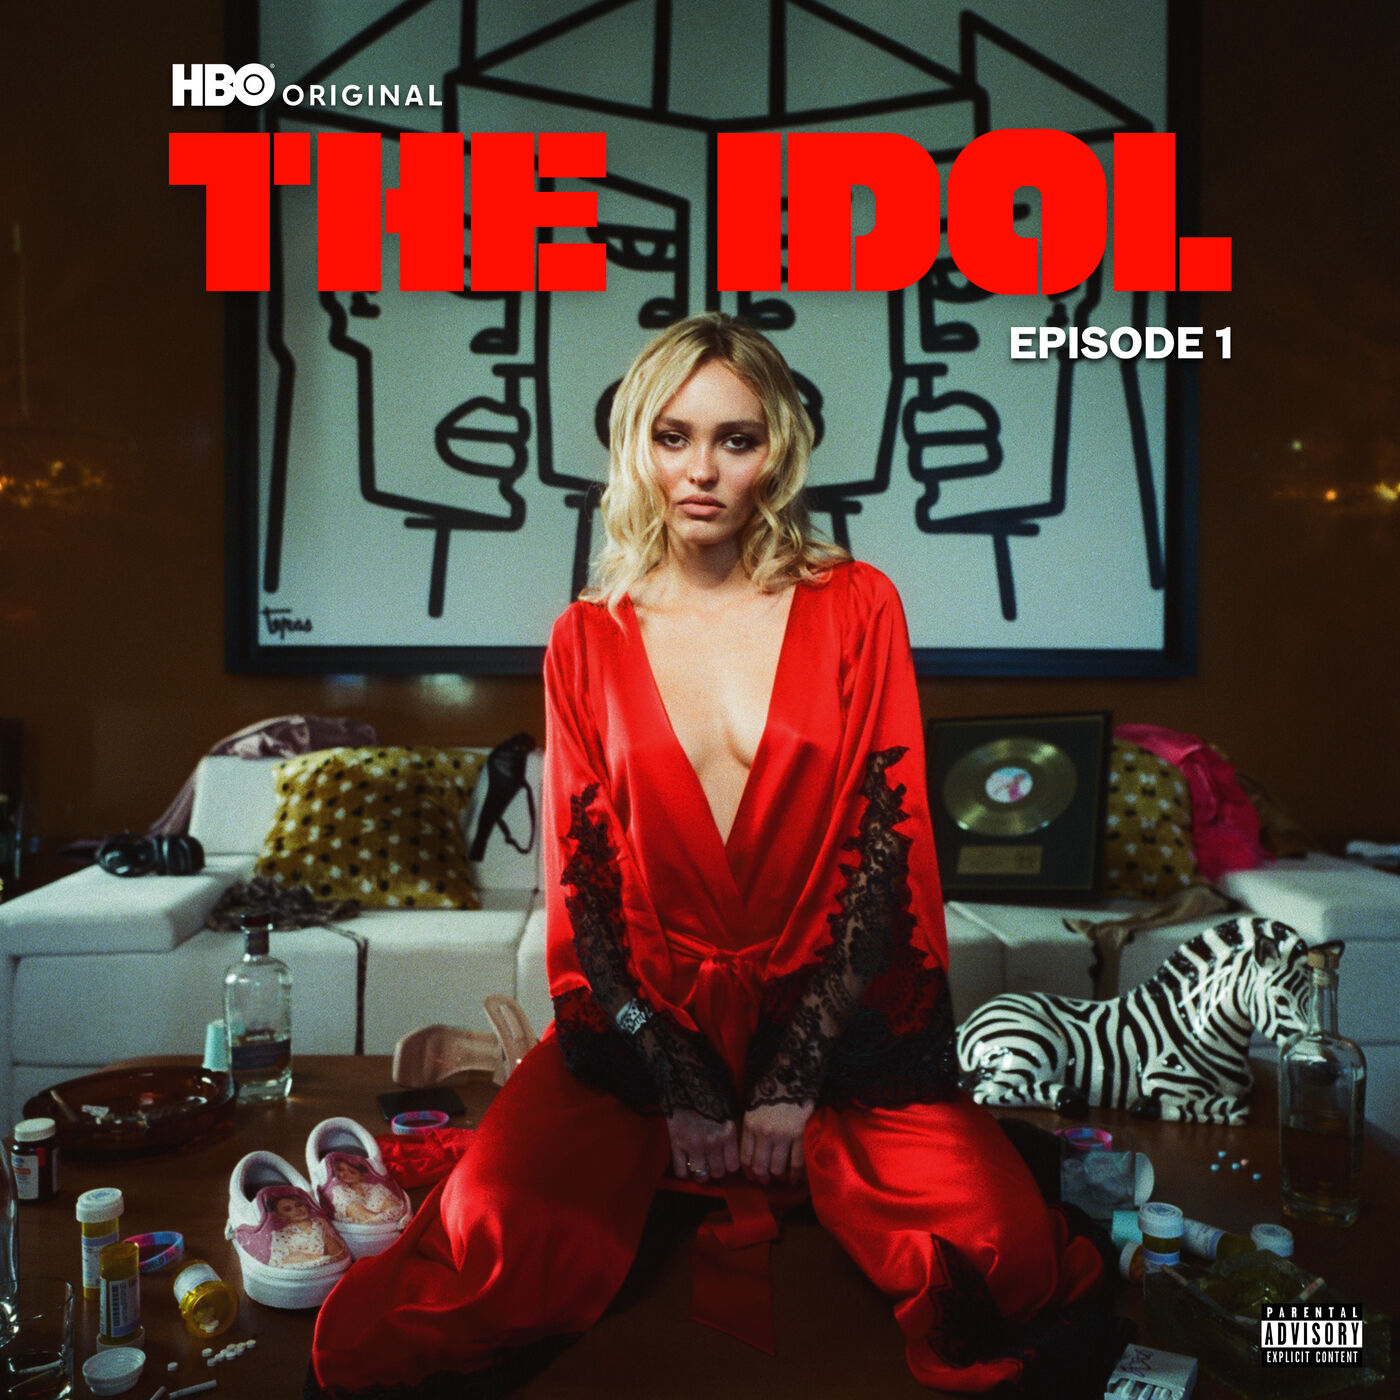 The Weeknd – The Idol Episode 1 (Music from the HBO Original Series)Ⓔ【44.1kHz／16bit】美国区-OppsUpro音乐帝国